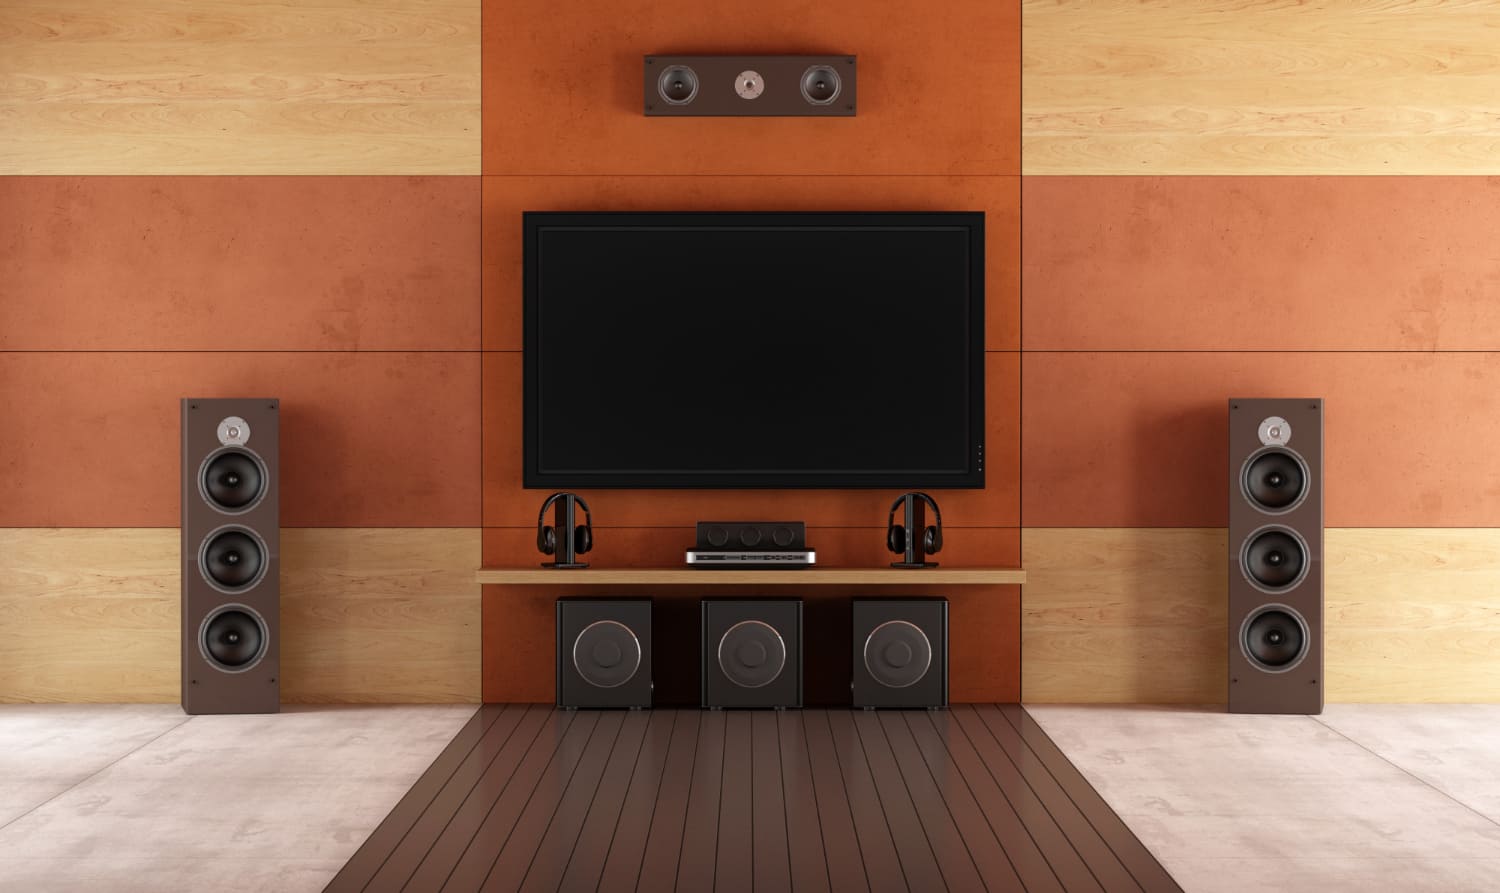 How to place speakers in an apartment?